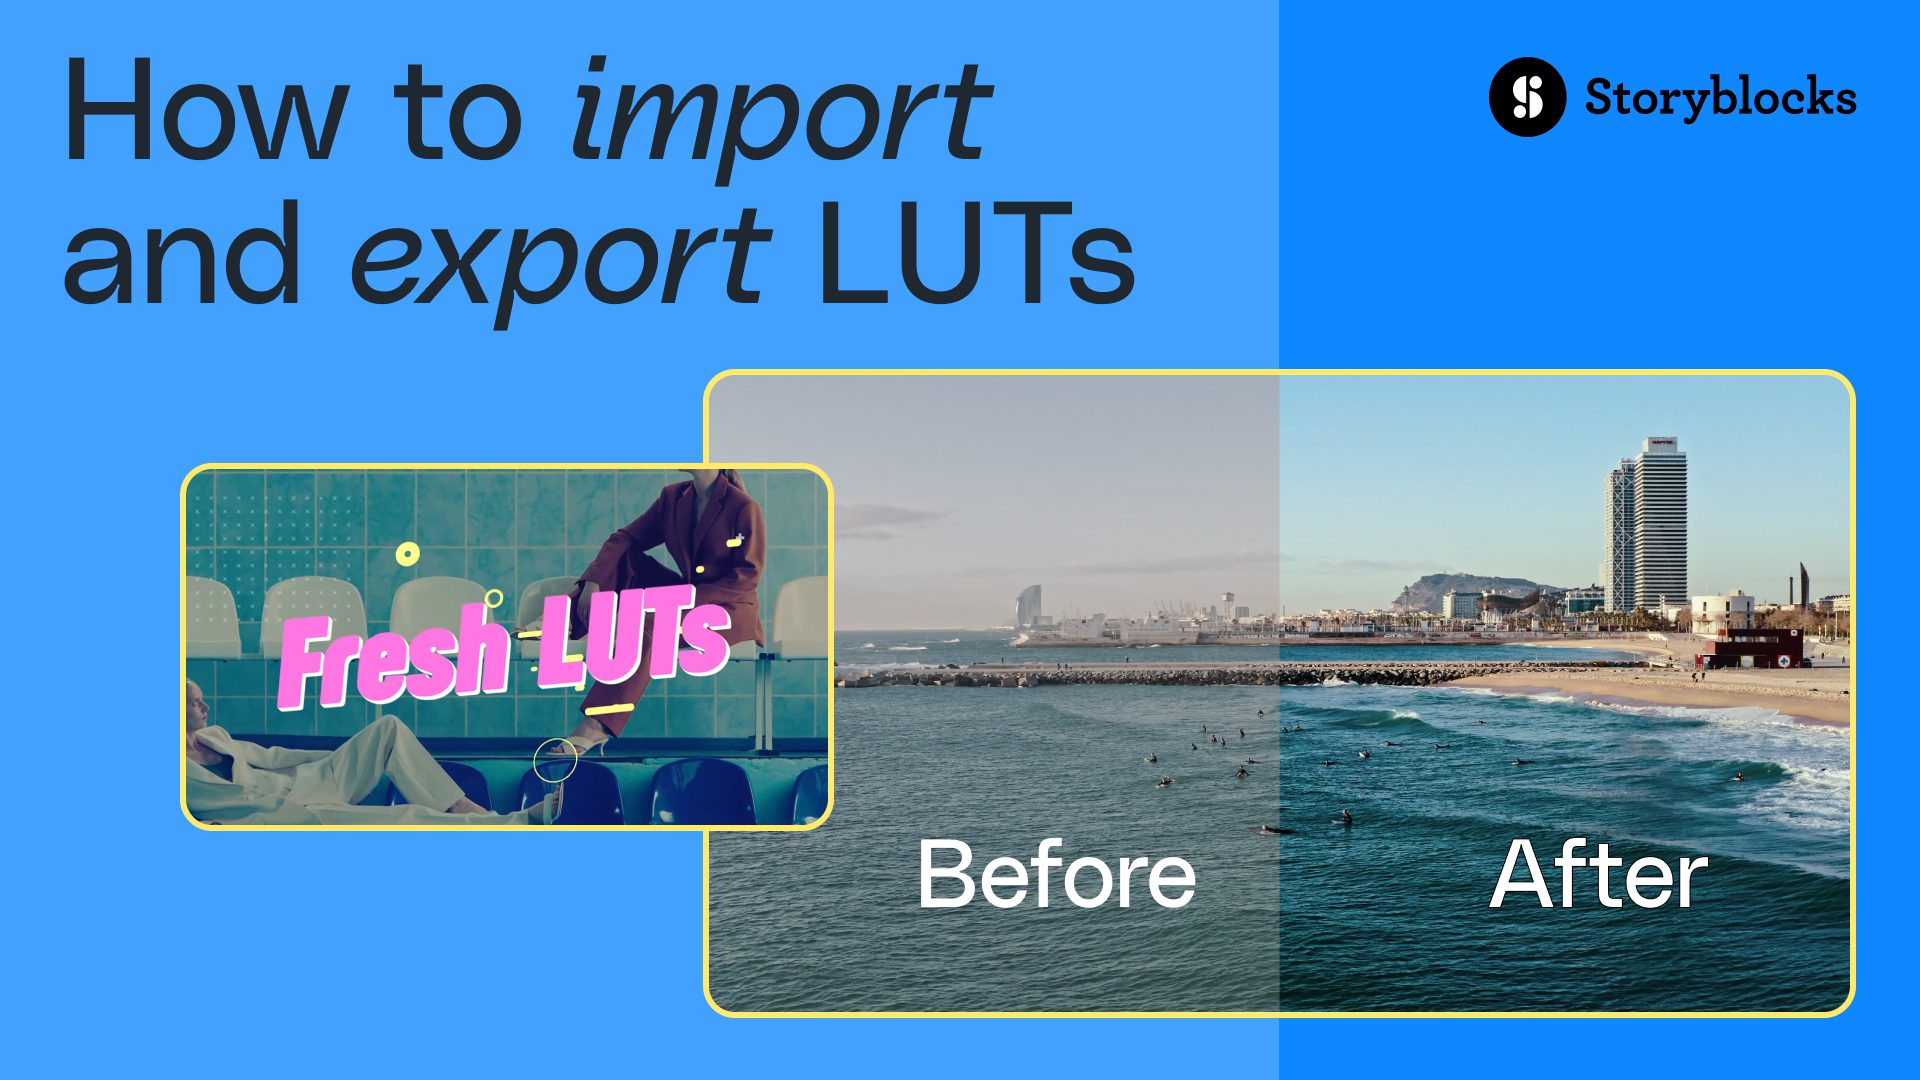 DaVinci Resolve LUTs: How to import and export - Storyblocks